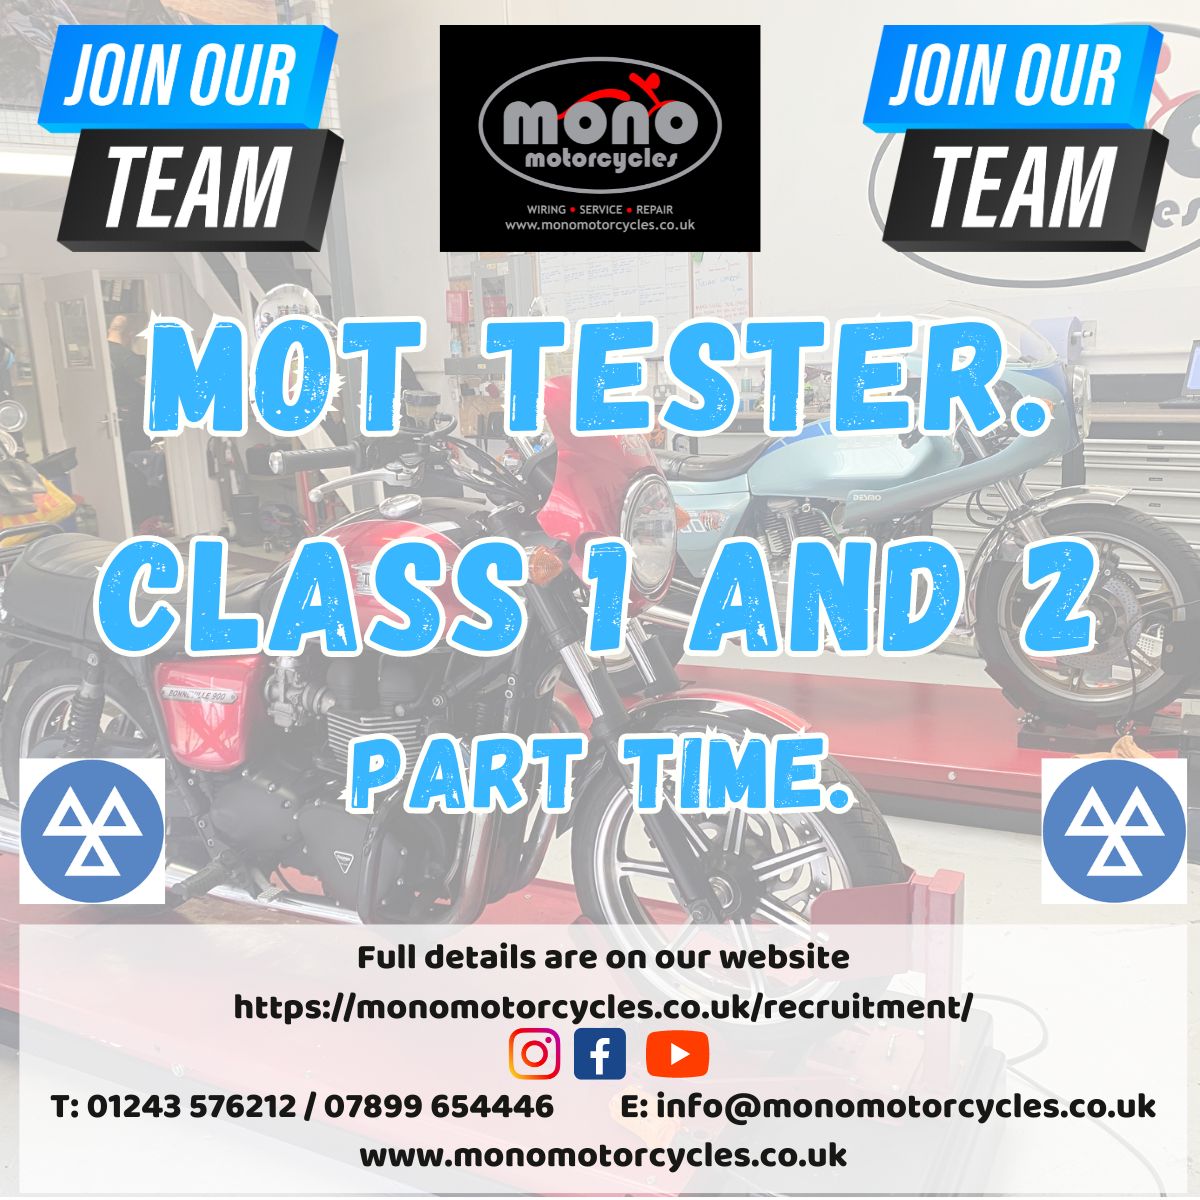 Part-Time Motorcycle MOT Tester opportunity with
@monomotorcycle1 at their top motorcycle workshop business in West Sussex. @JCPinSurreySussex #motorcycles #motorcyclejobs #bikejobs #jobs #jobsearch #vacancy #sussexjobs #westsussex  More Info & Apply👉bikejobs.co.uk